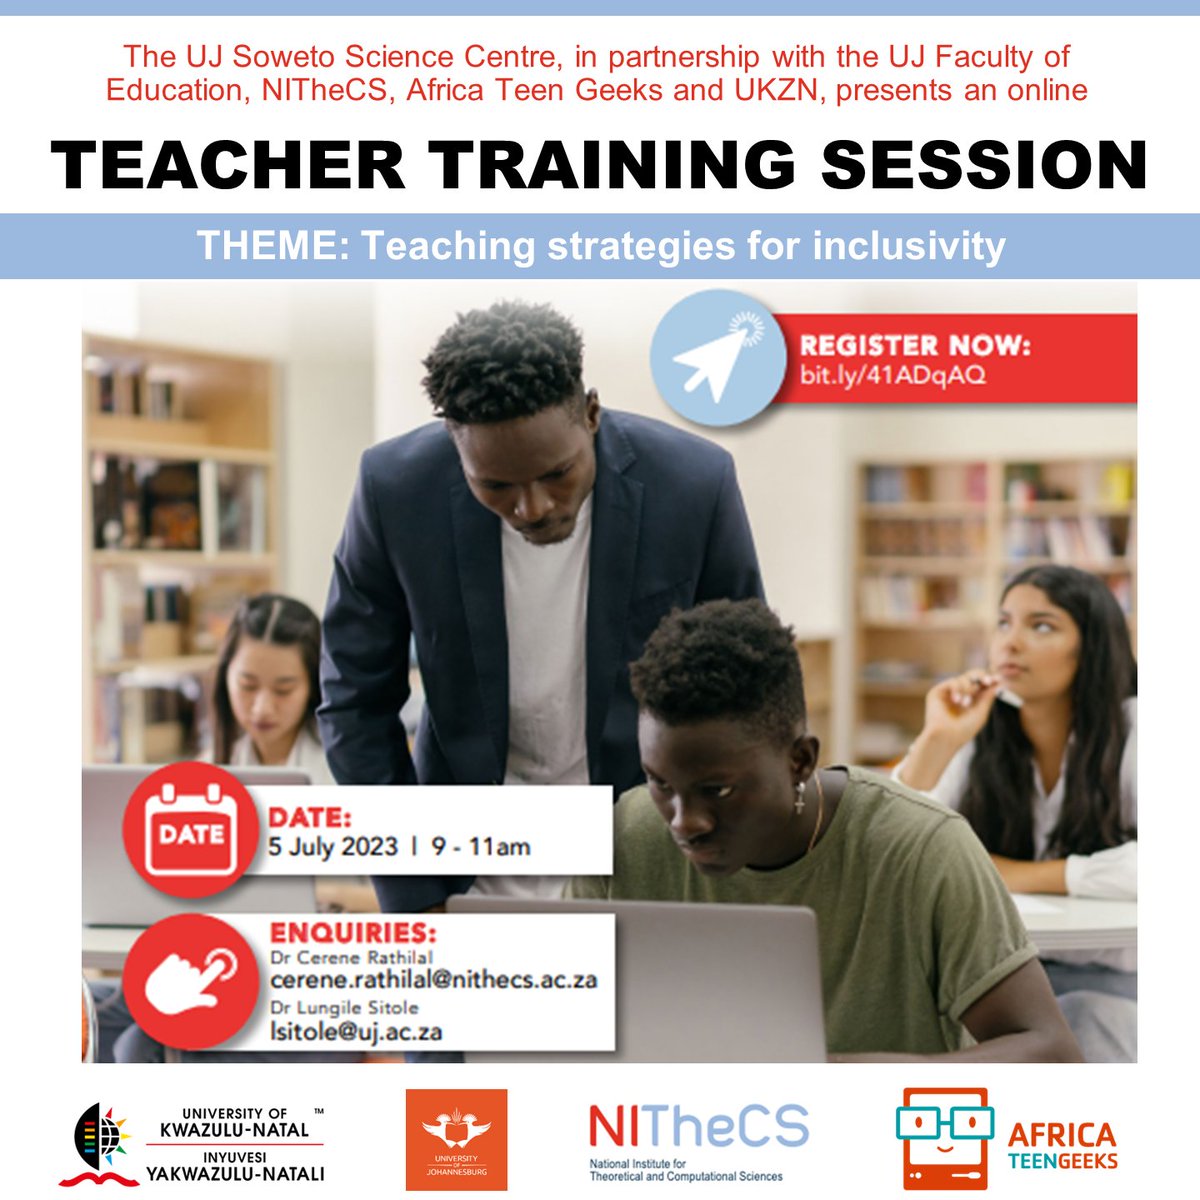 Reminder - Free online training session for school teachers - taking place tomorrow @09h00-11h00 - mailchi.mp/nithecs/teache… #teacher #teachertraining #training